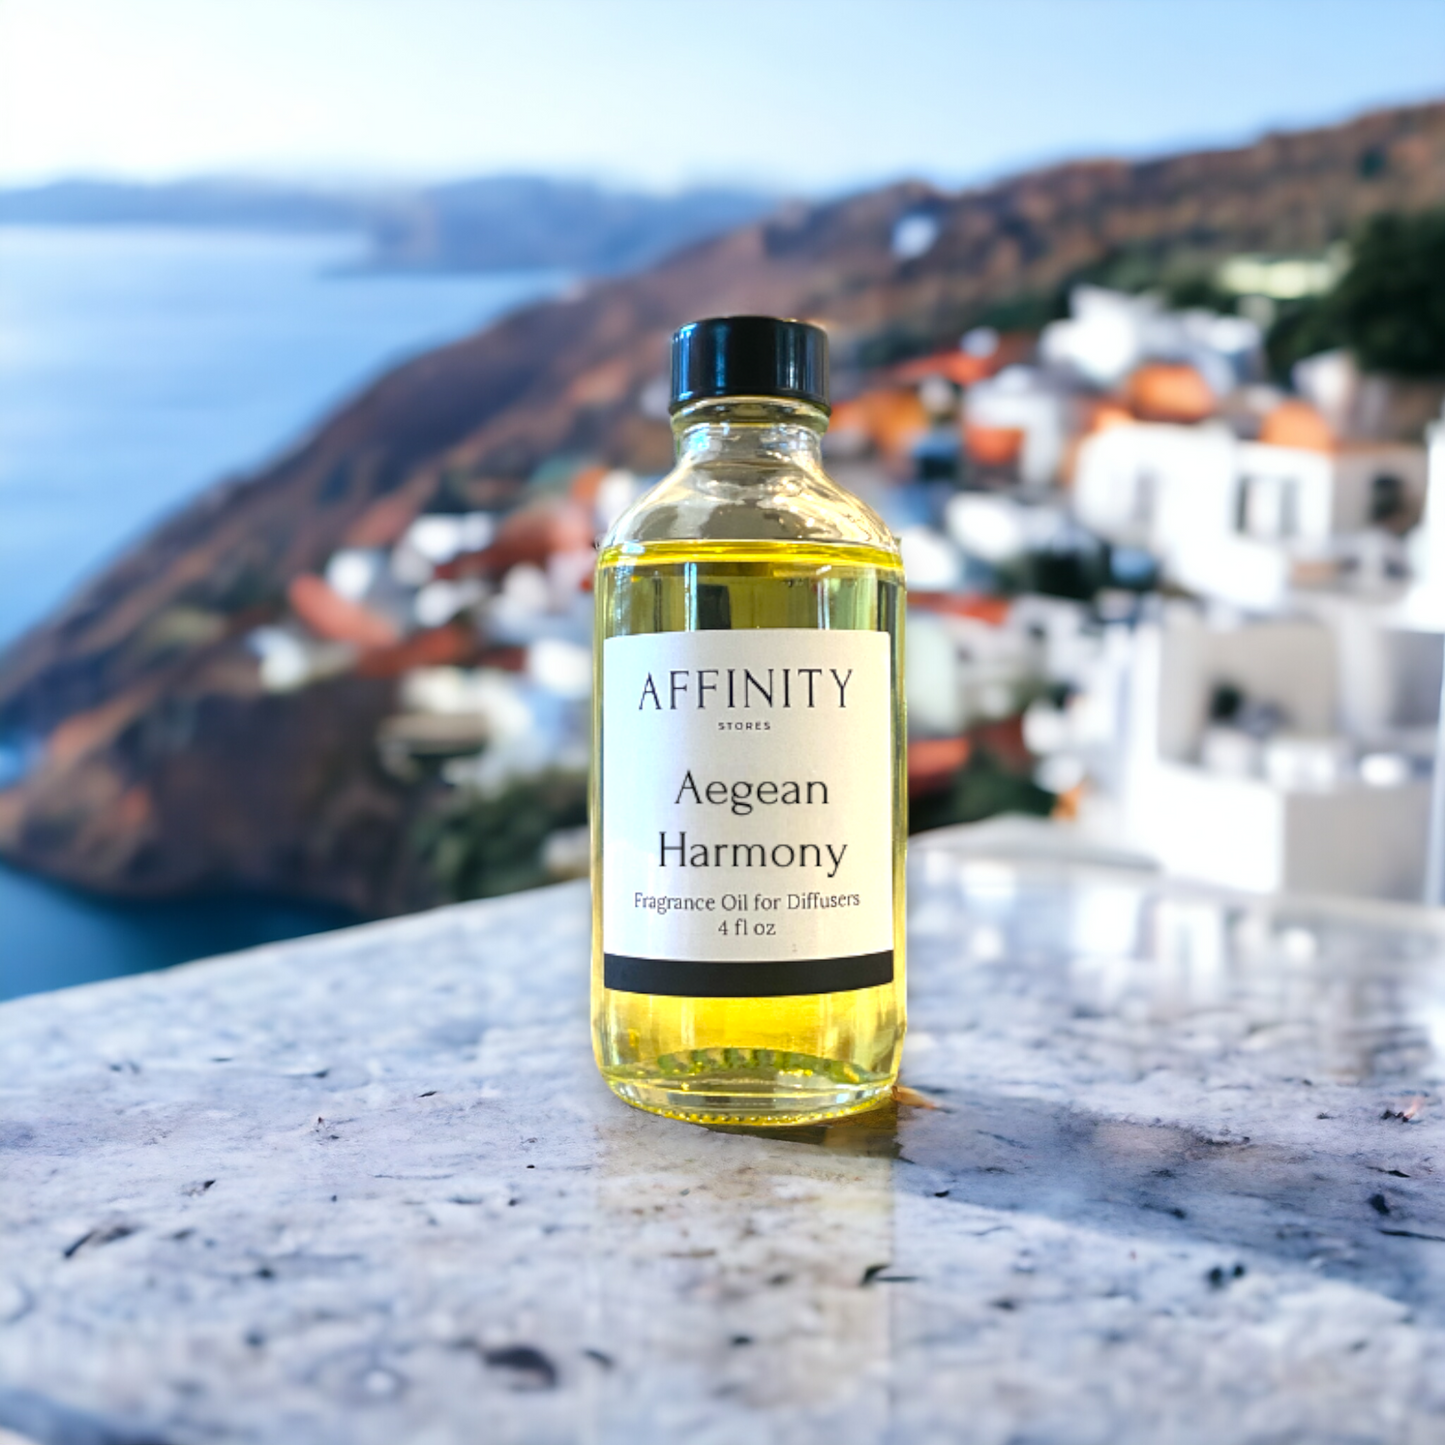 Affinity Stores Fragrance Oil "Aegean Harmony" - Inspired by Santorini, Greece